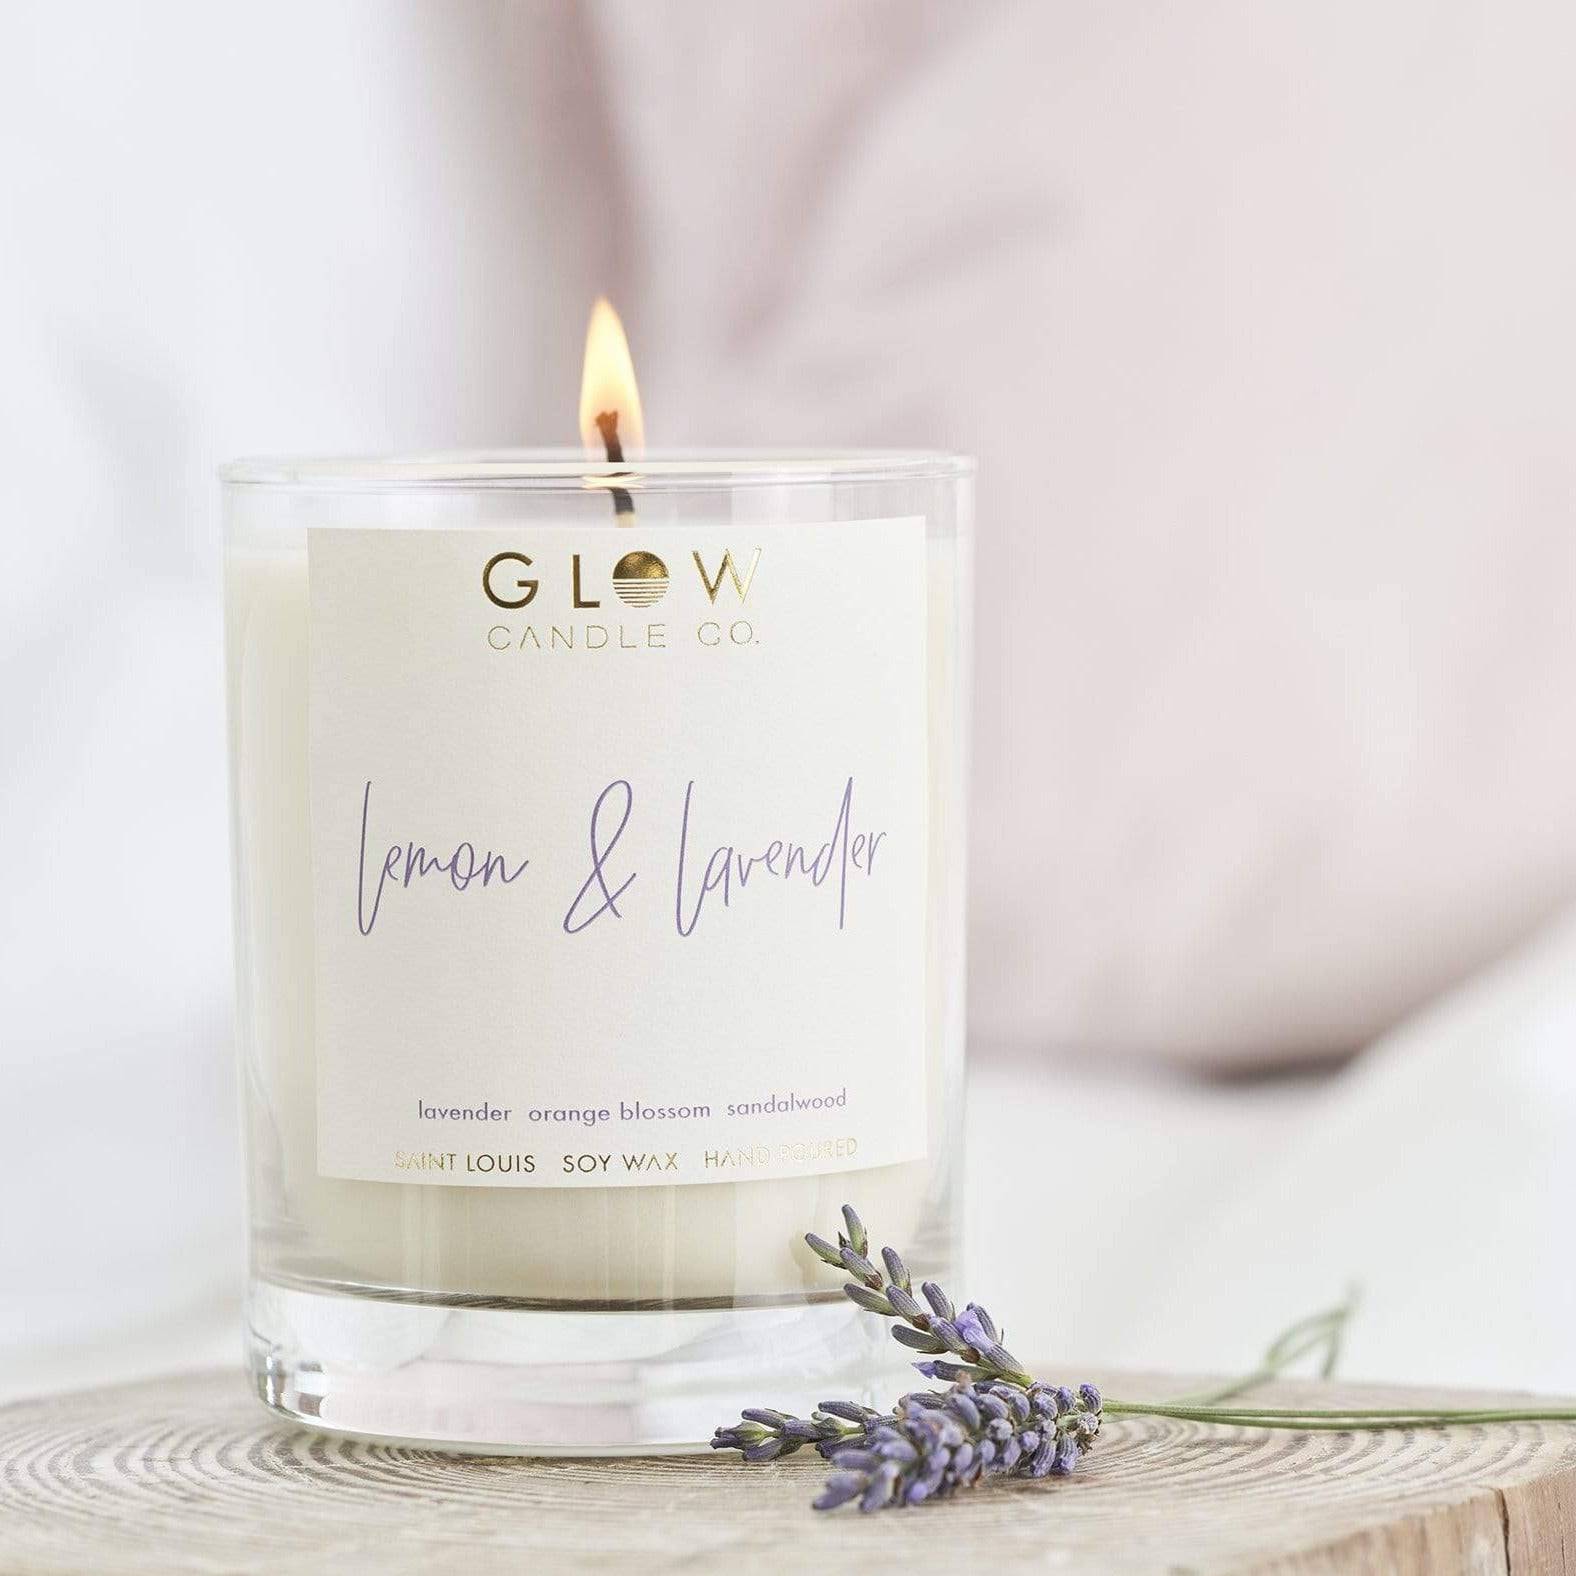  Lemon & Lavender Candle Glow Candle Company Perfumarie